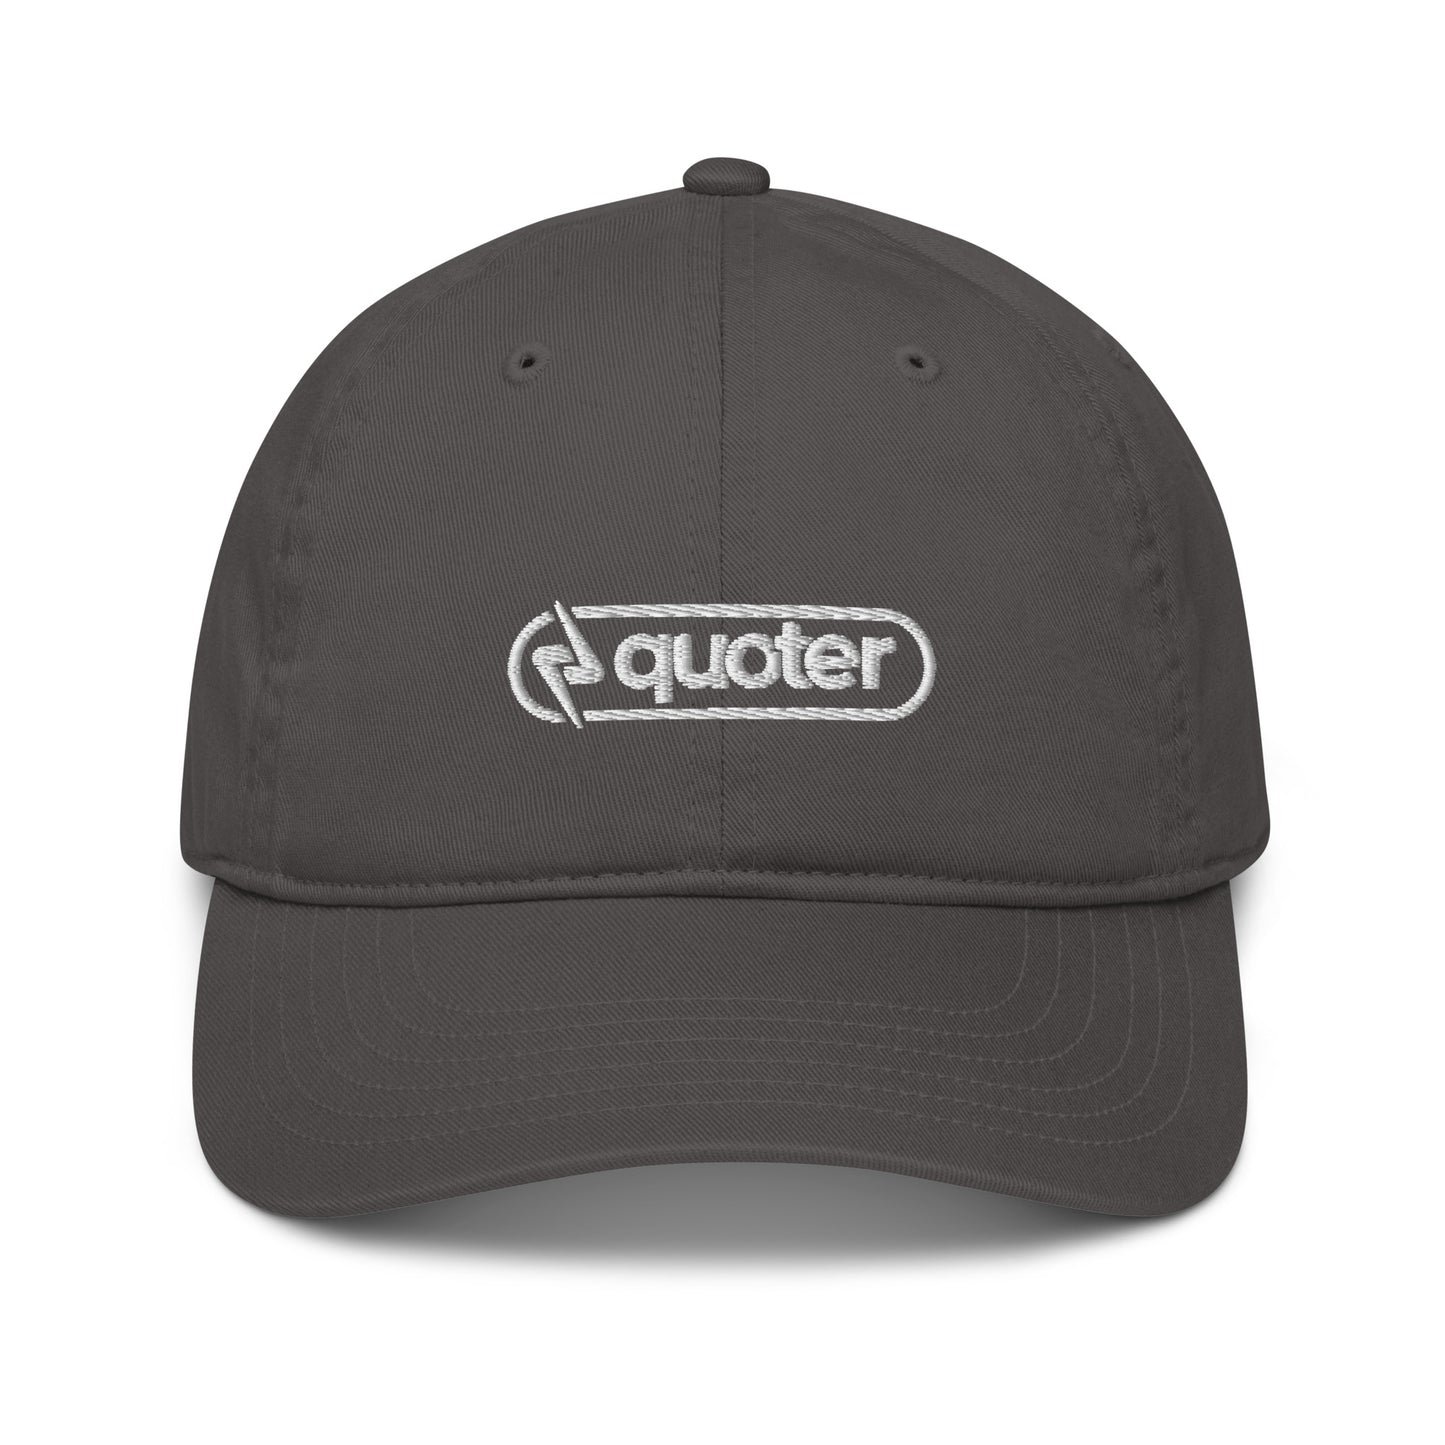 Quoter dad hat